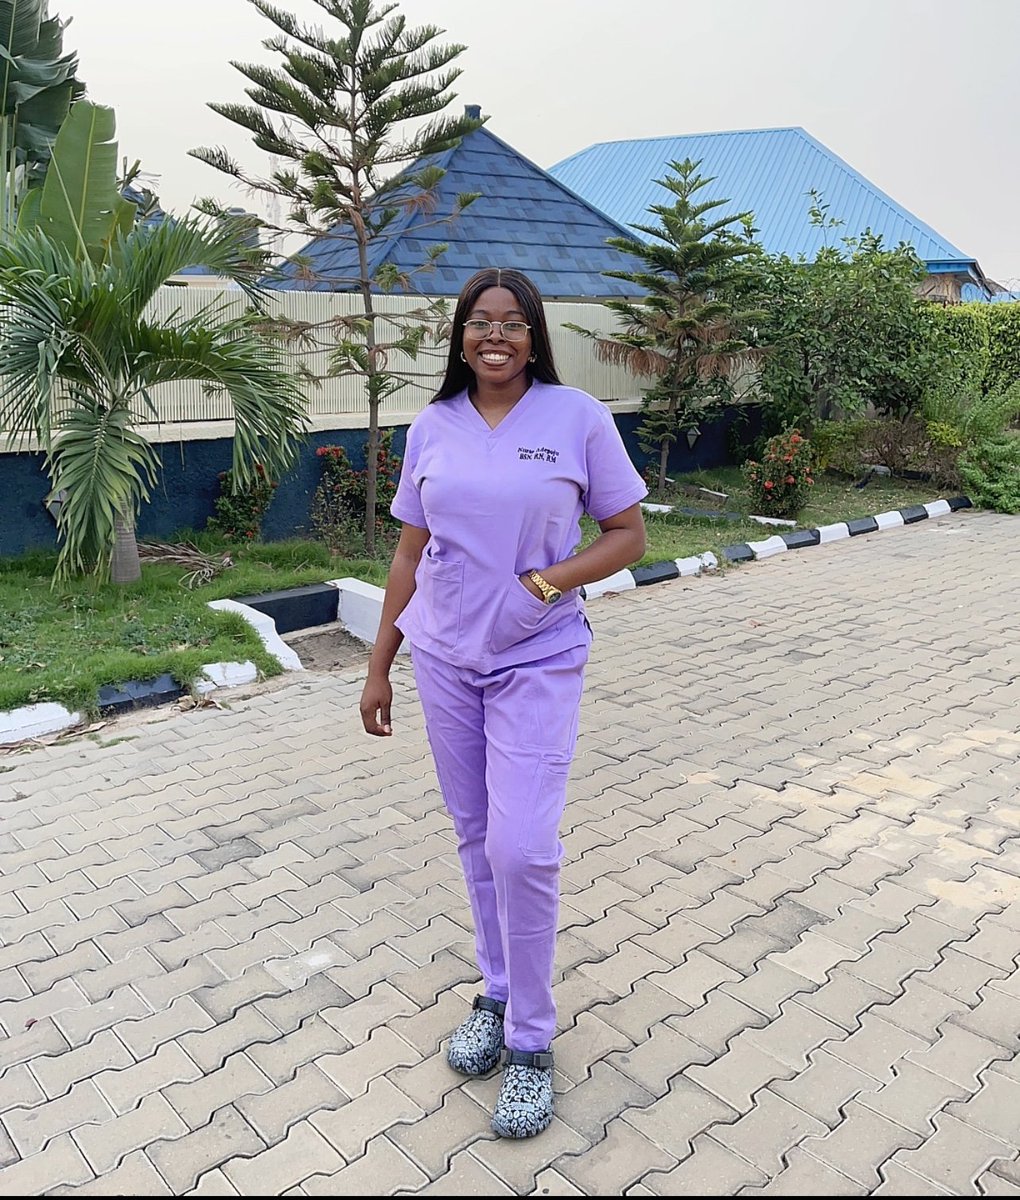 Turn heads and make a statement in our lilac scrubs – because why blend in when you were born to stand out? 💁‍♀️💜

Available in all sizes.

Price: 14,500-19,500 naira🦋🦋🦋

#LilacScrubs #MakeAStatement #ScrubStyle #BornToStandOut